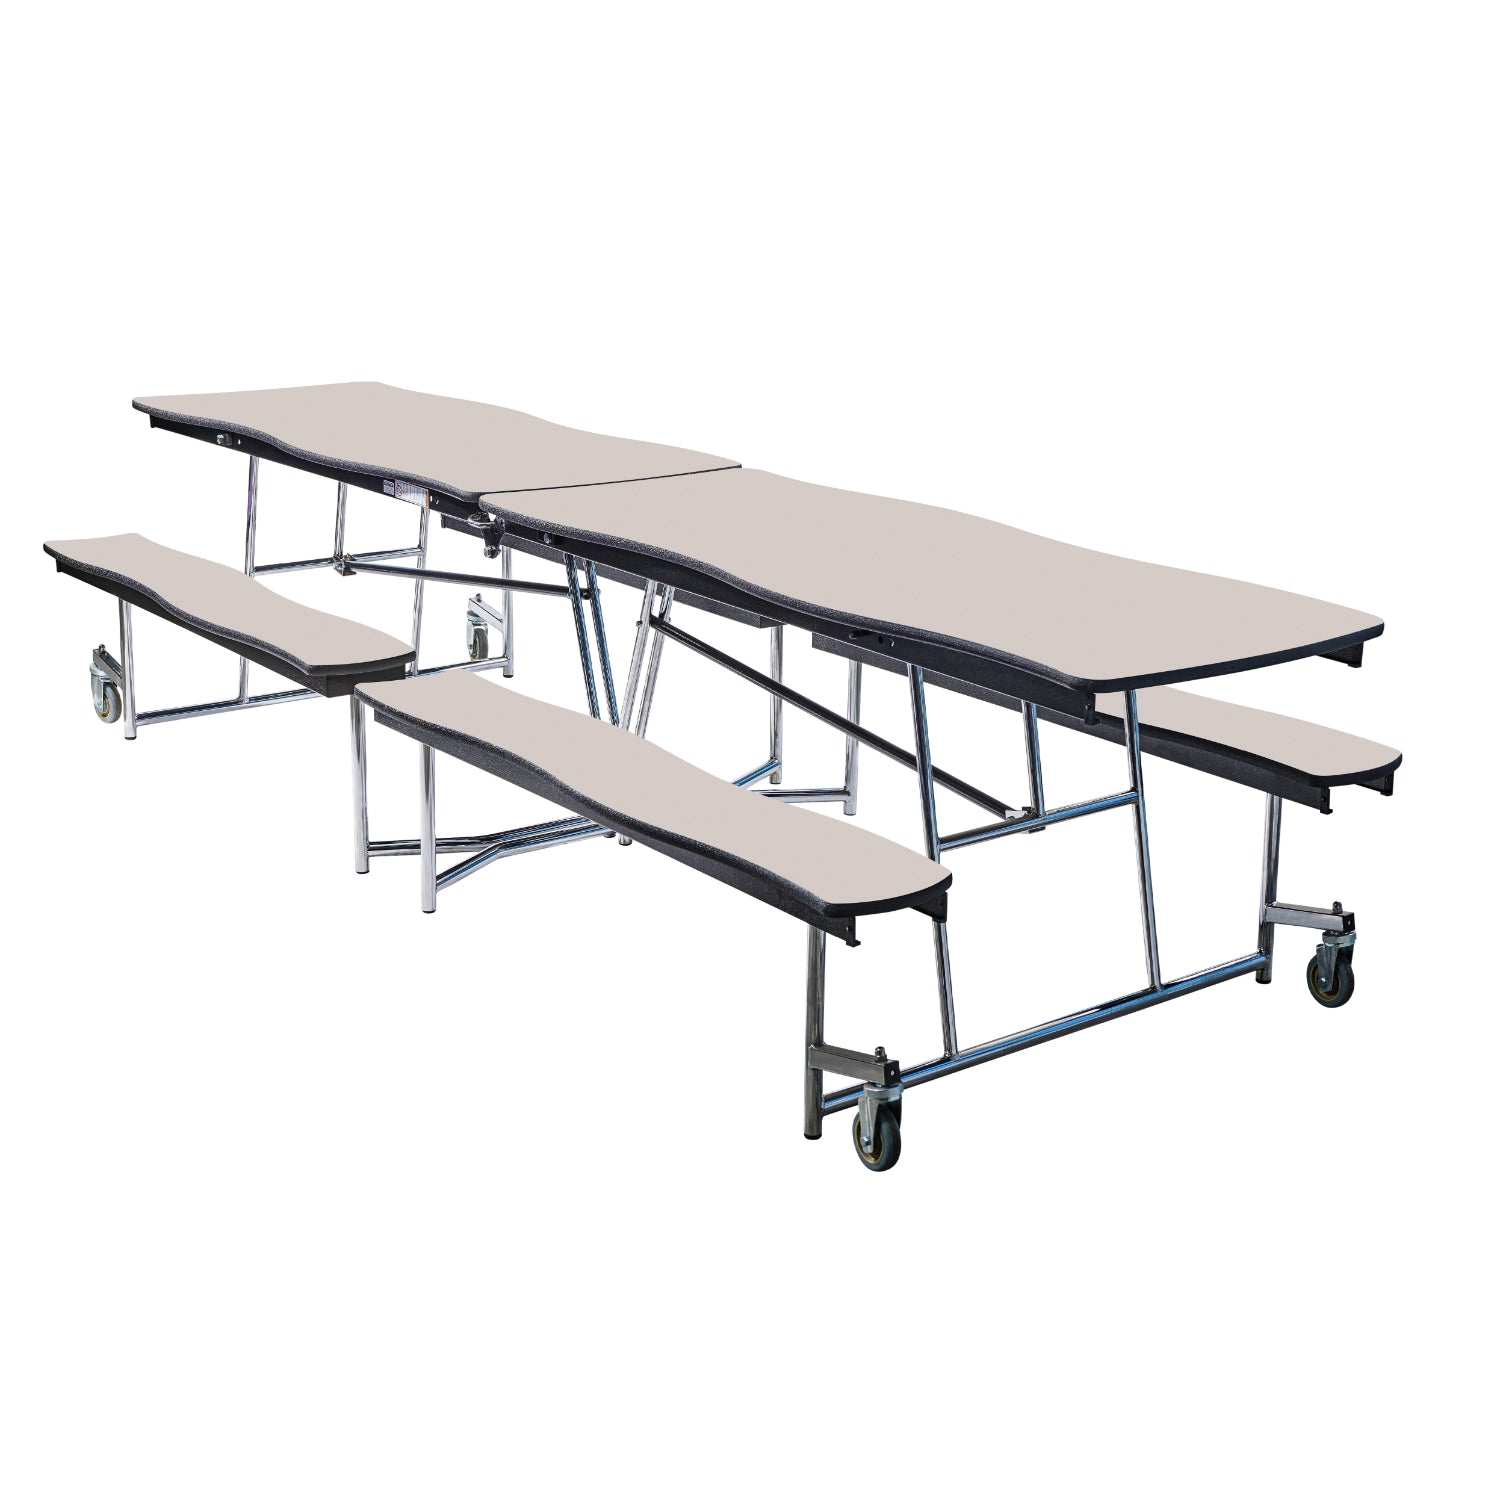 Mobile Cafeteria Table with Benches, 10' Swerve, Particleboard Core, Vinyl T-Mold Edge, Chrome Frame